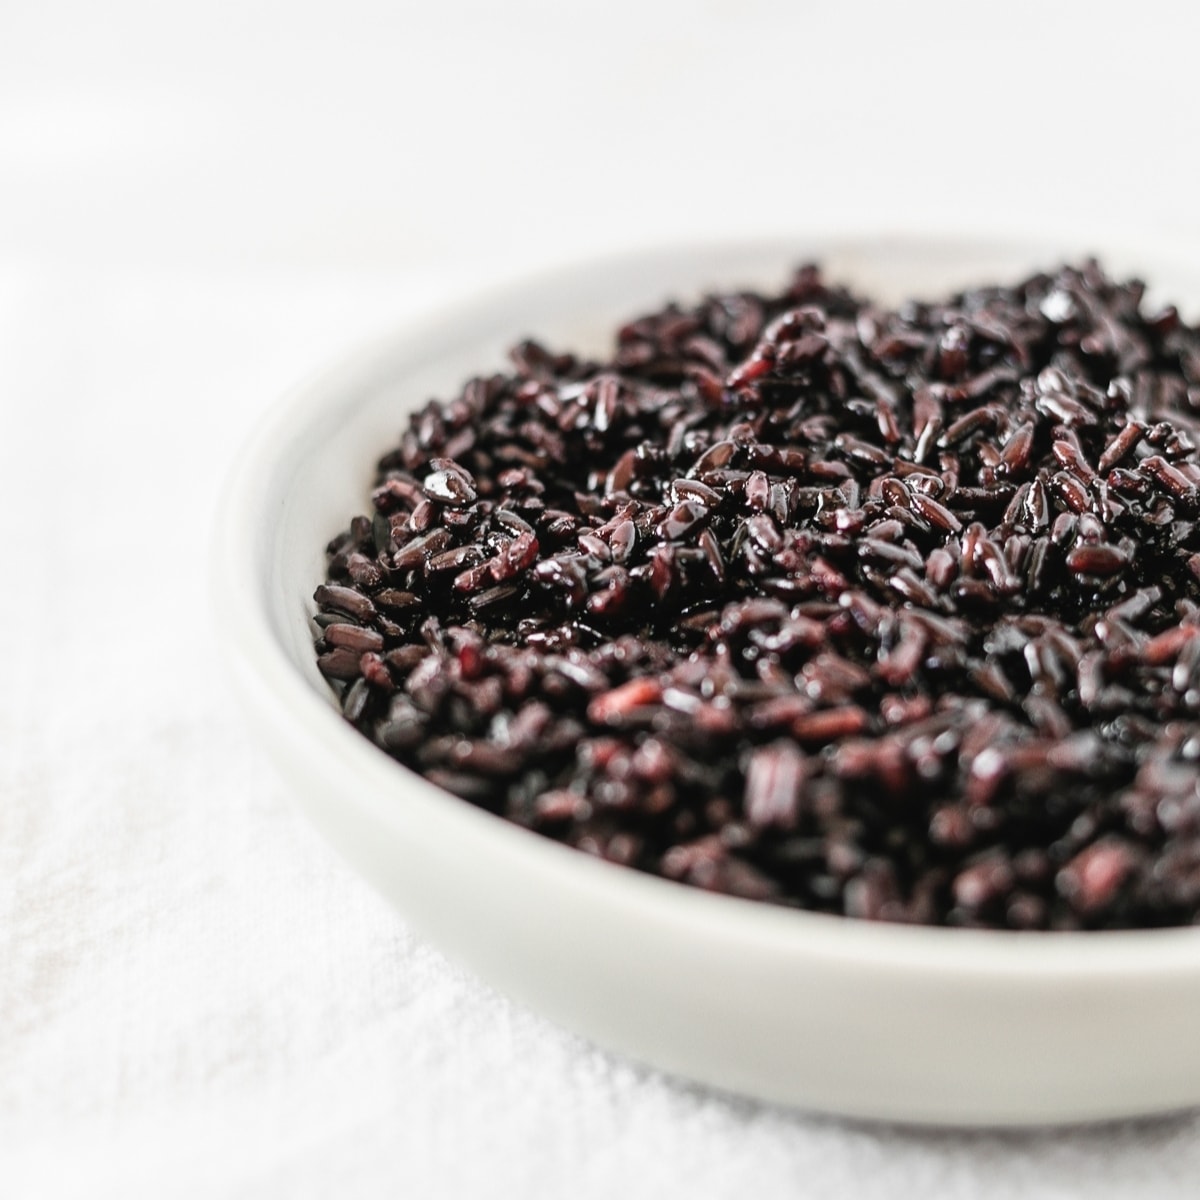 https://livelytable.com/wp-content/uploads/2021/02/how-to-cook-black-rice-1.jpg